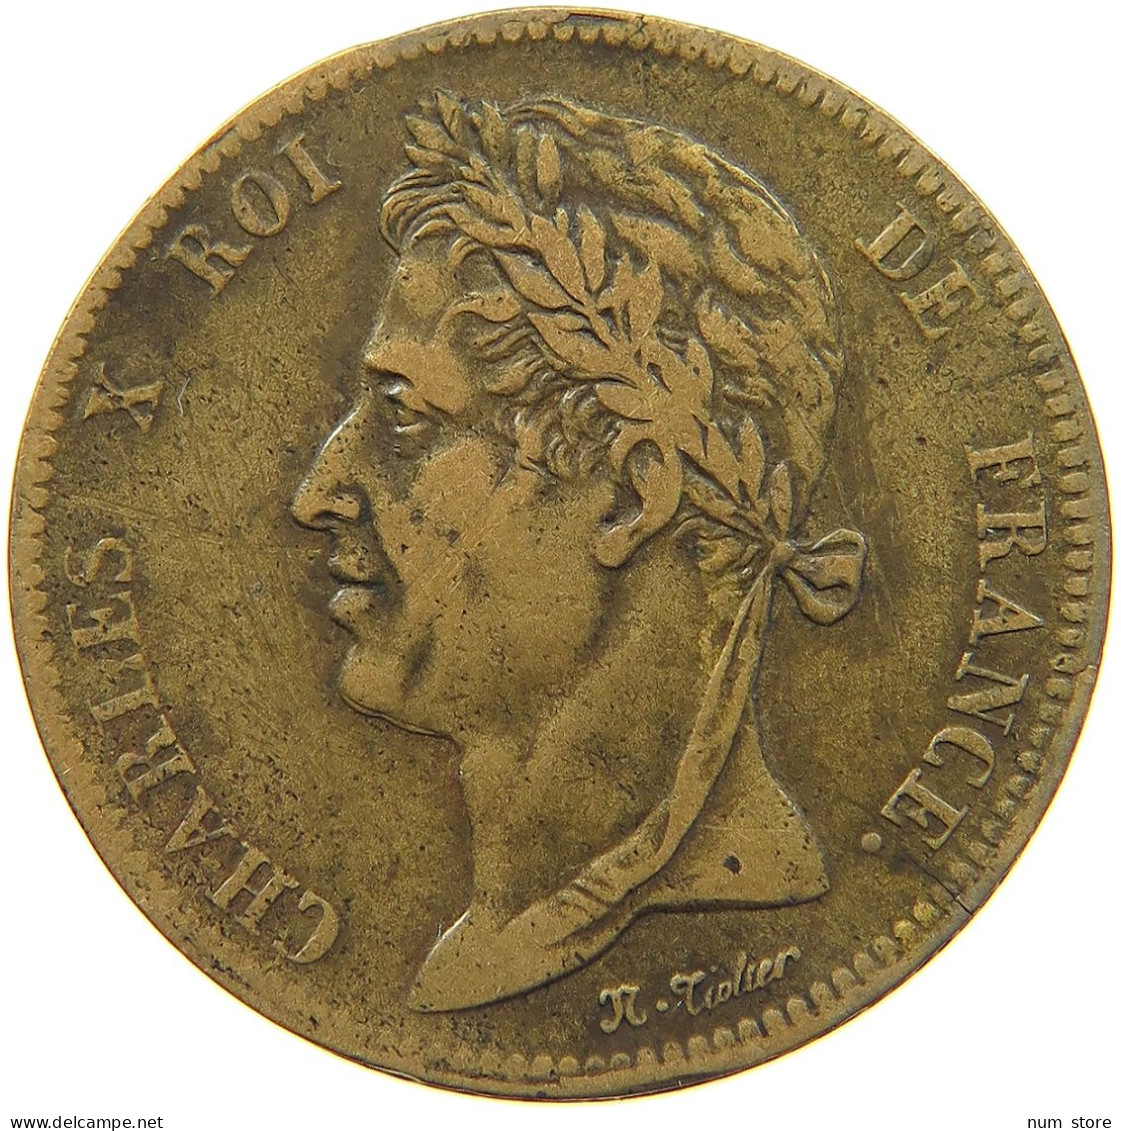 FRENCH COLONIES 5 CENTIMES 1825 A CHARLES X. (1824-1830) #MA 101120 - French Colonies (1817-1844)